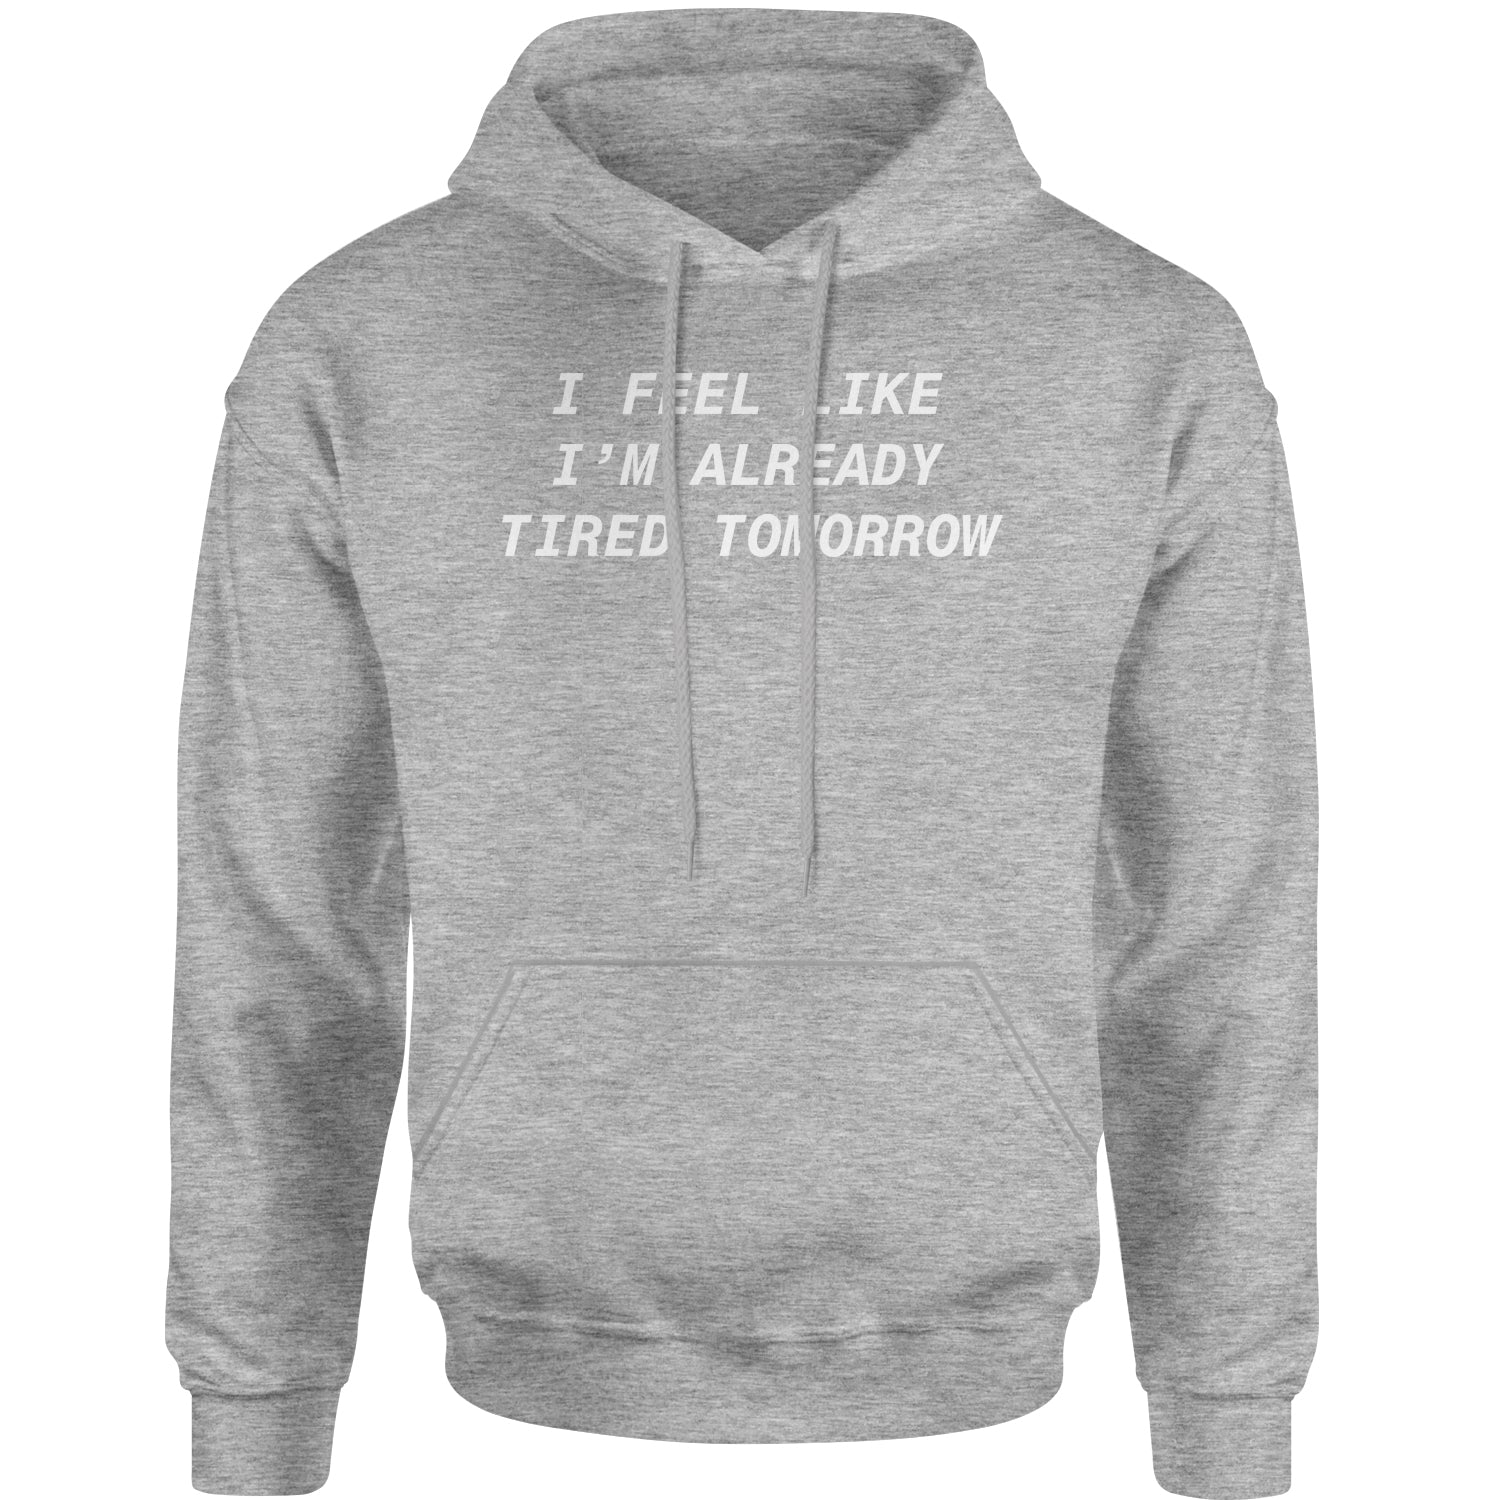 I Feel Like I'm Already Tired Tomorrow Adult Hoodie Sweatshirt #expressiontees by Expression Tees